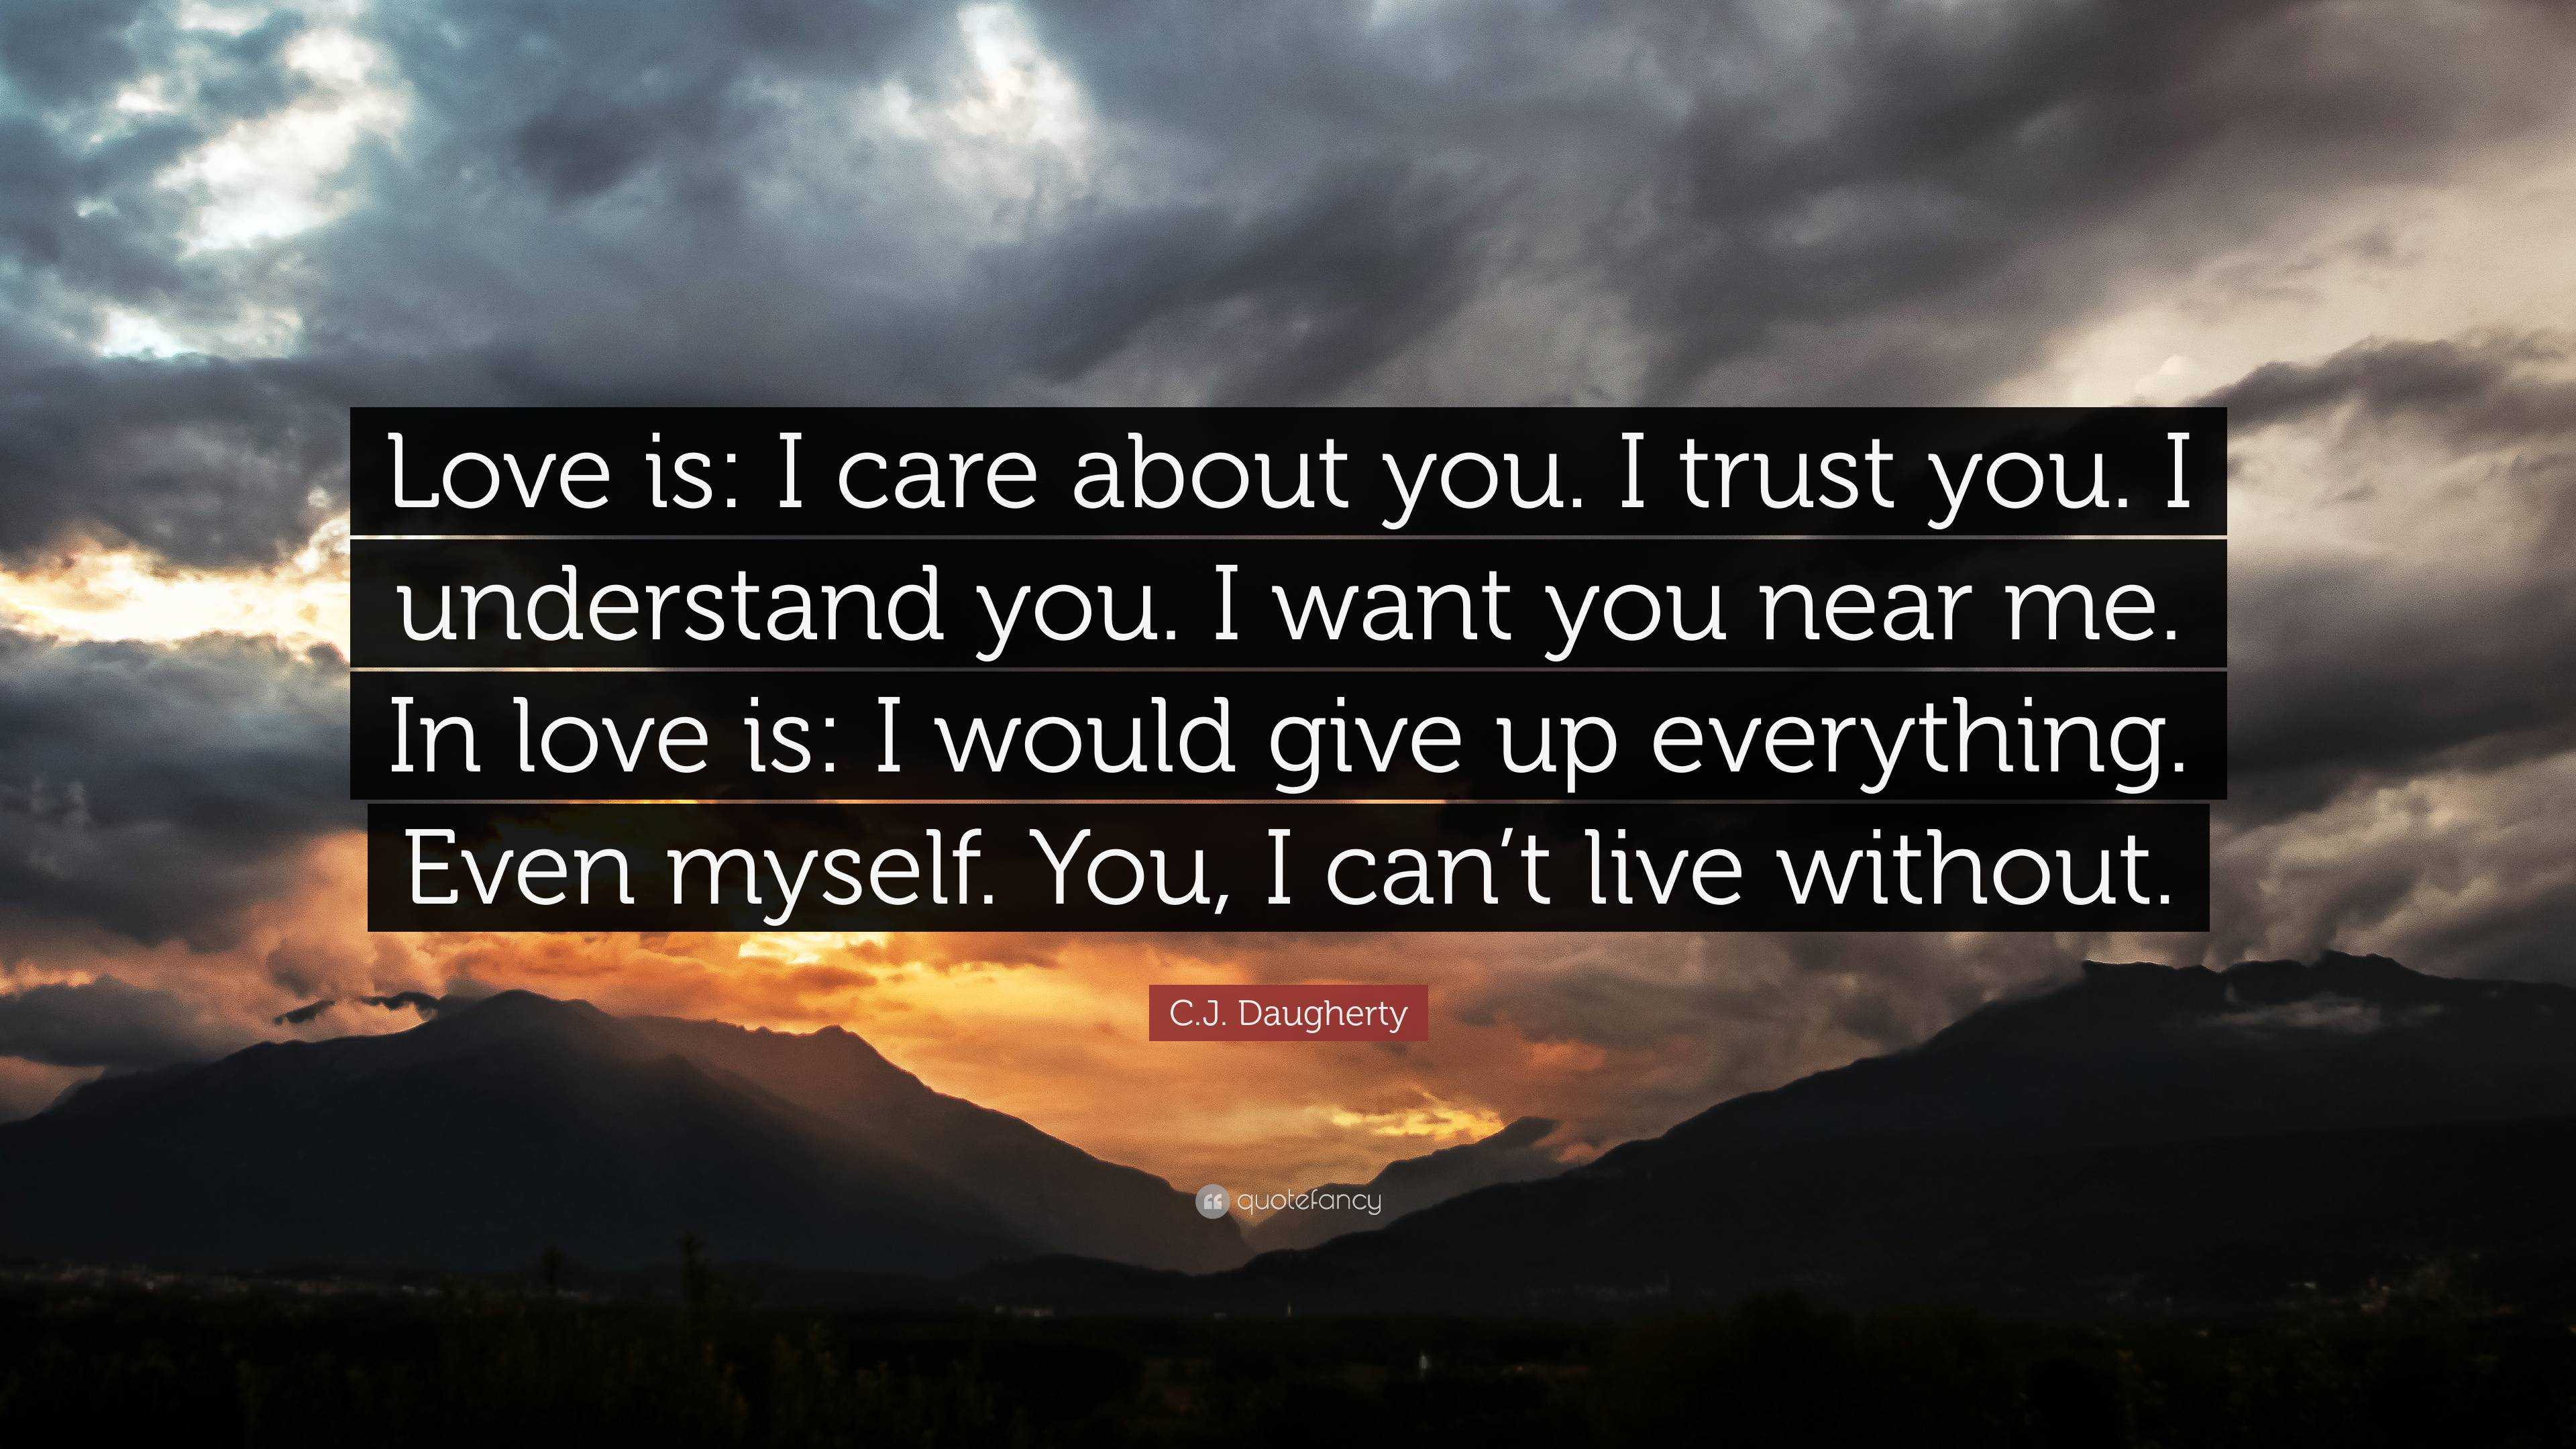 https://quotefancy.com/media/wallpaper/3840x2160/6765600-C-J-Daugherty-Quote-Love-is-I-care-about-you-I-trust-you-I.jpg